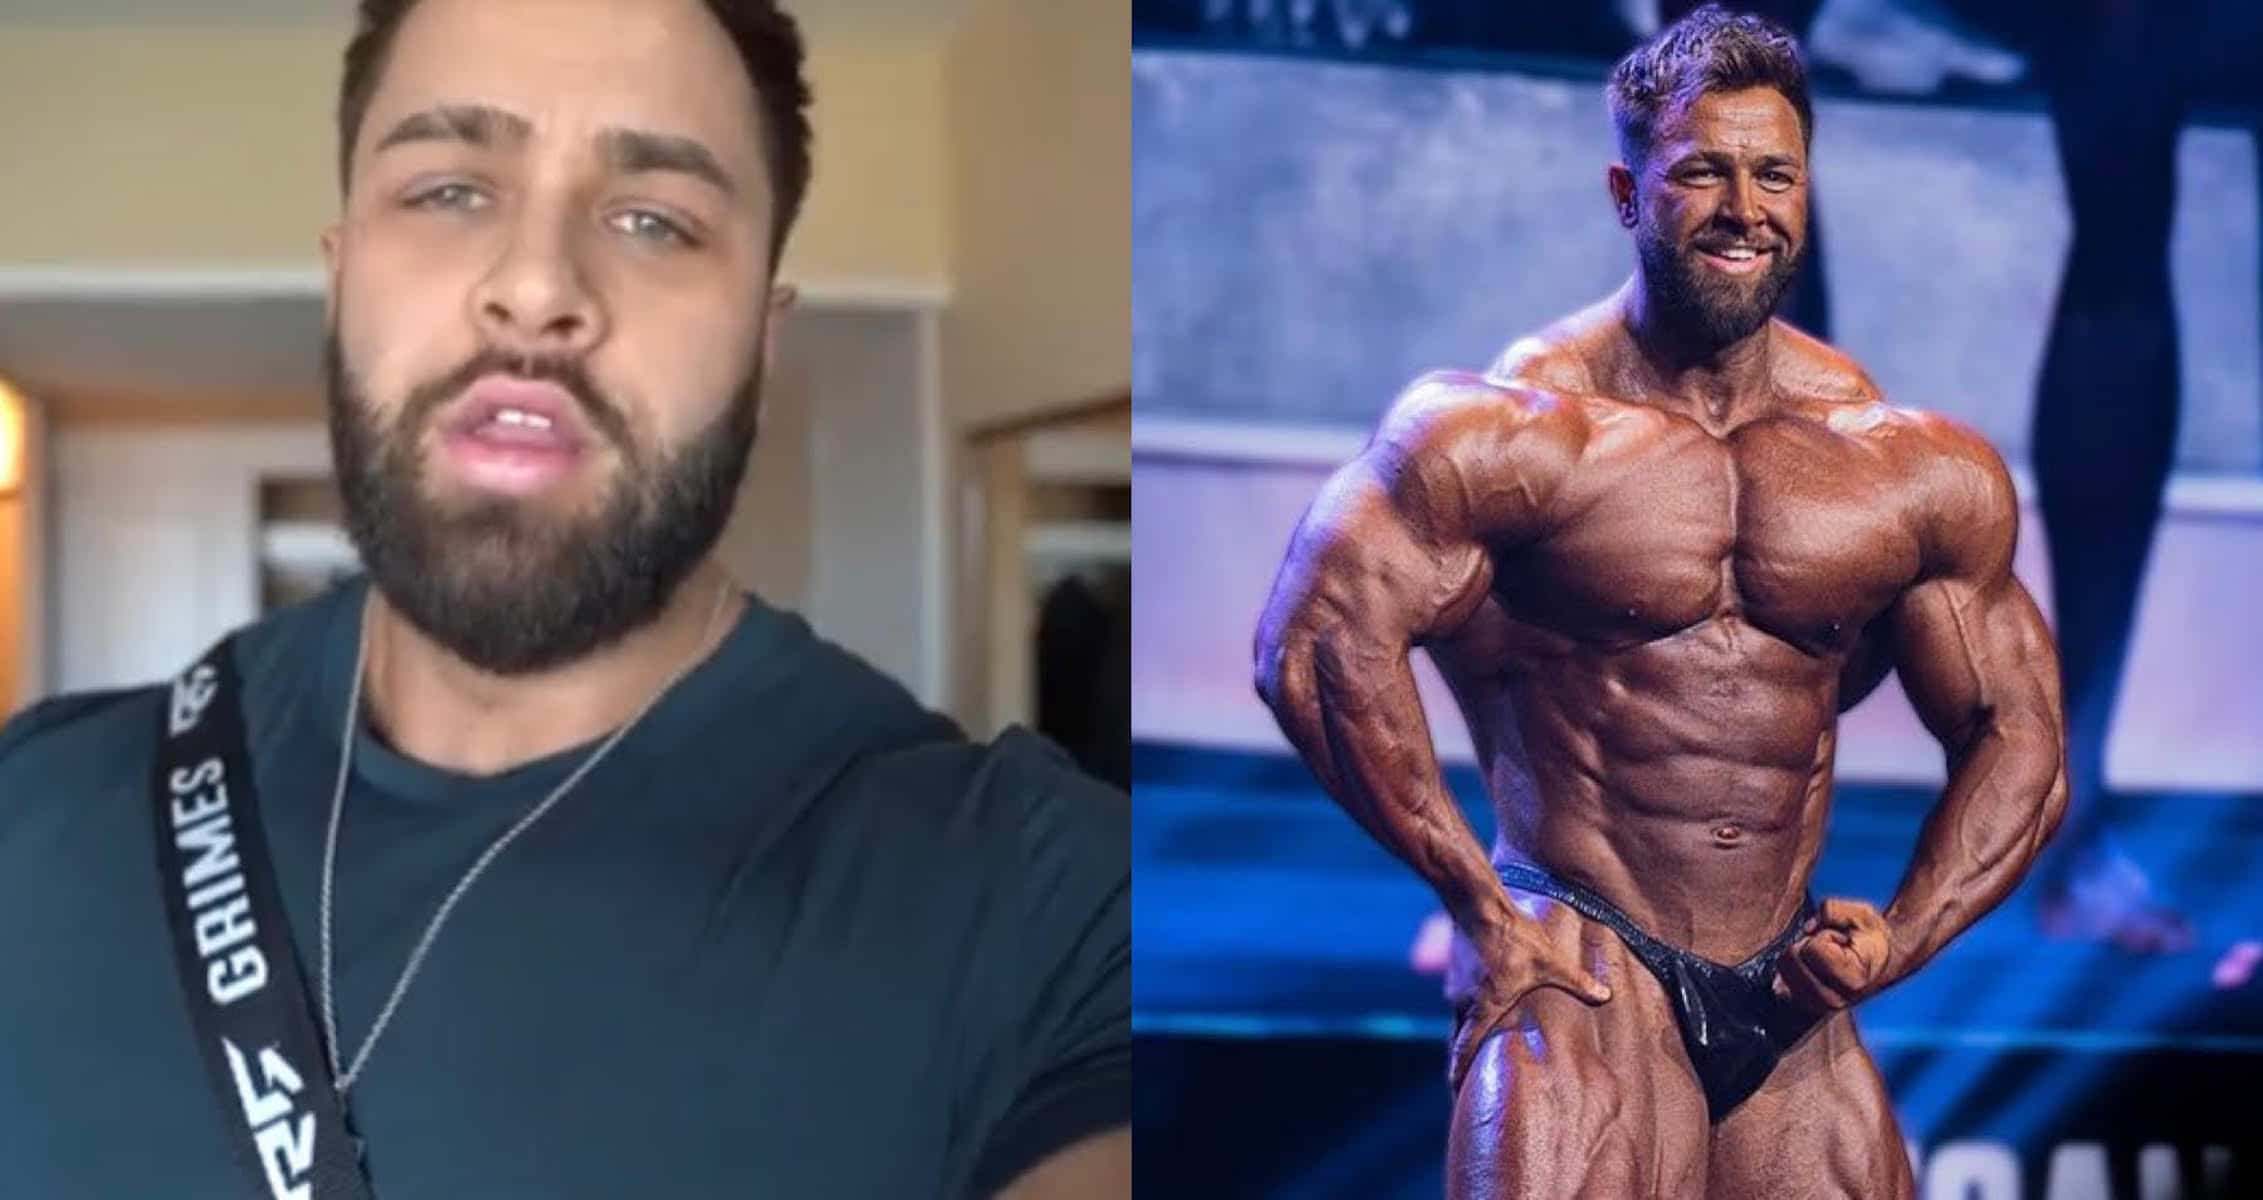 Regan Grimes Announces He Is Done Competing Until 2022 Olympia